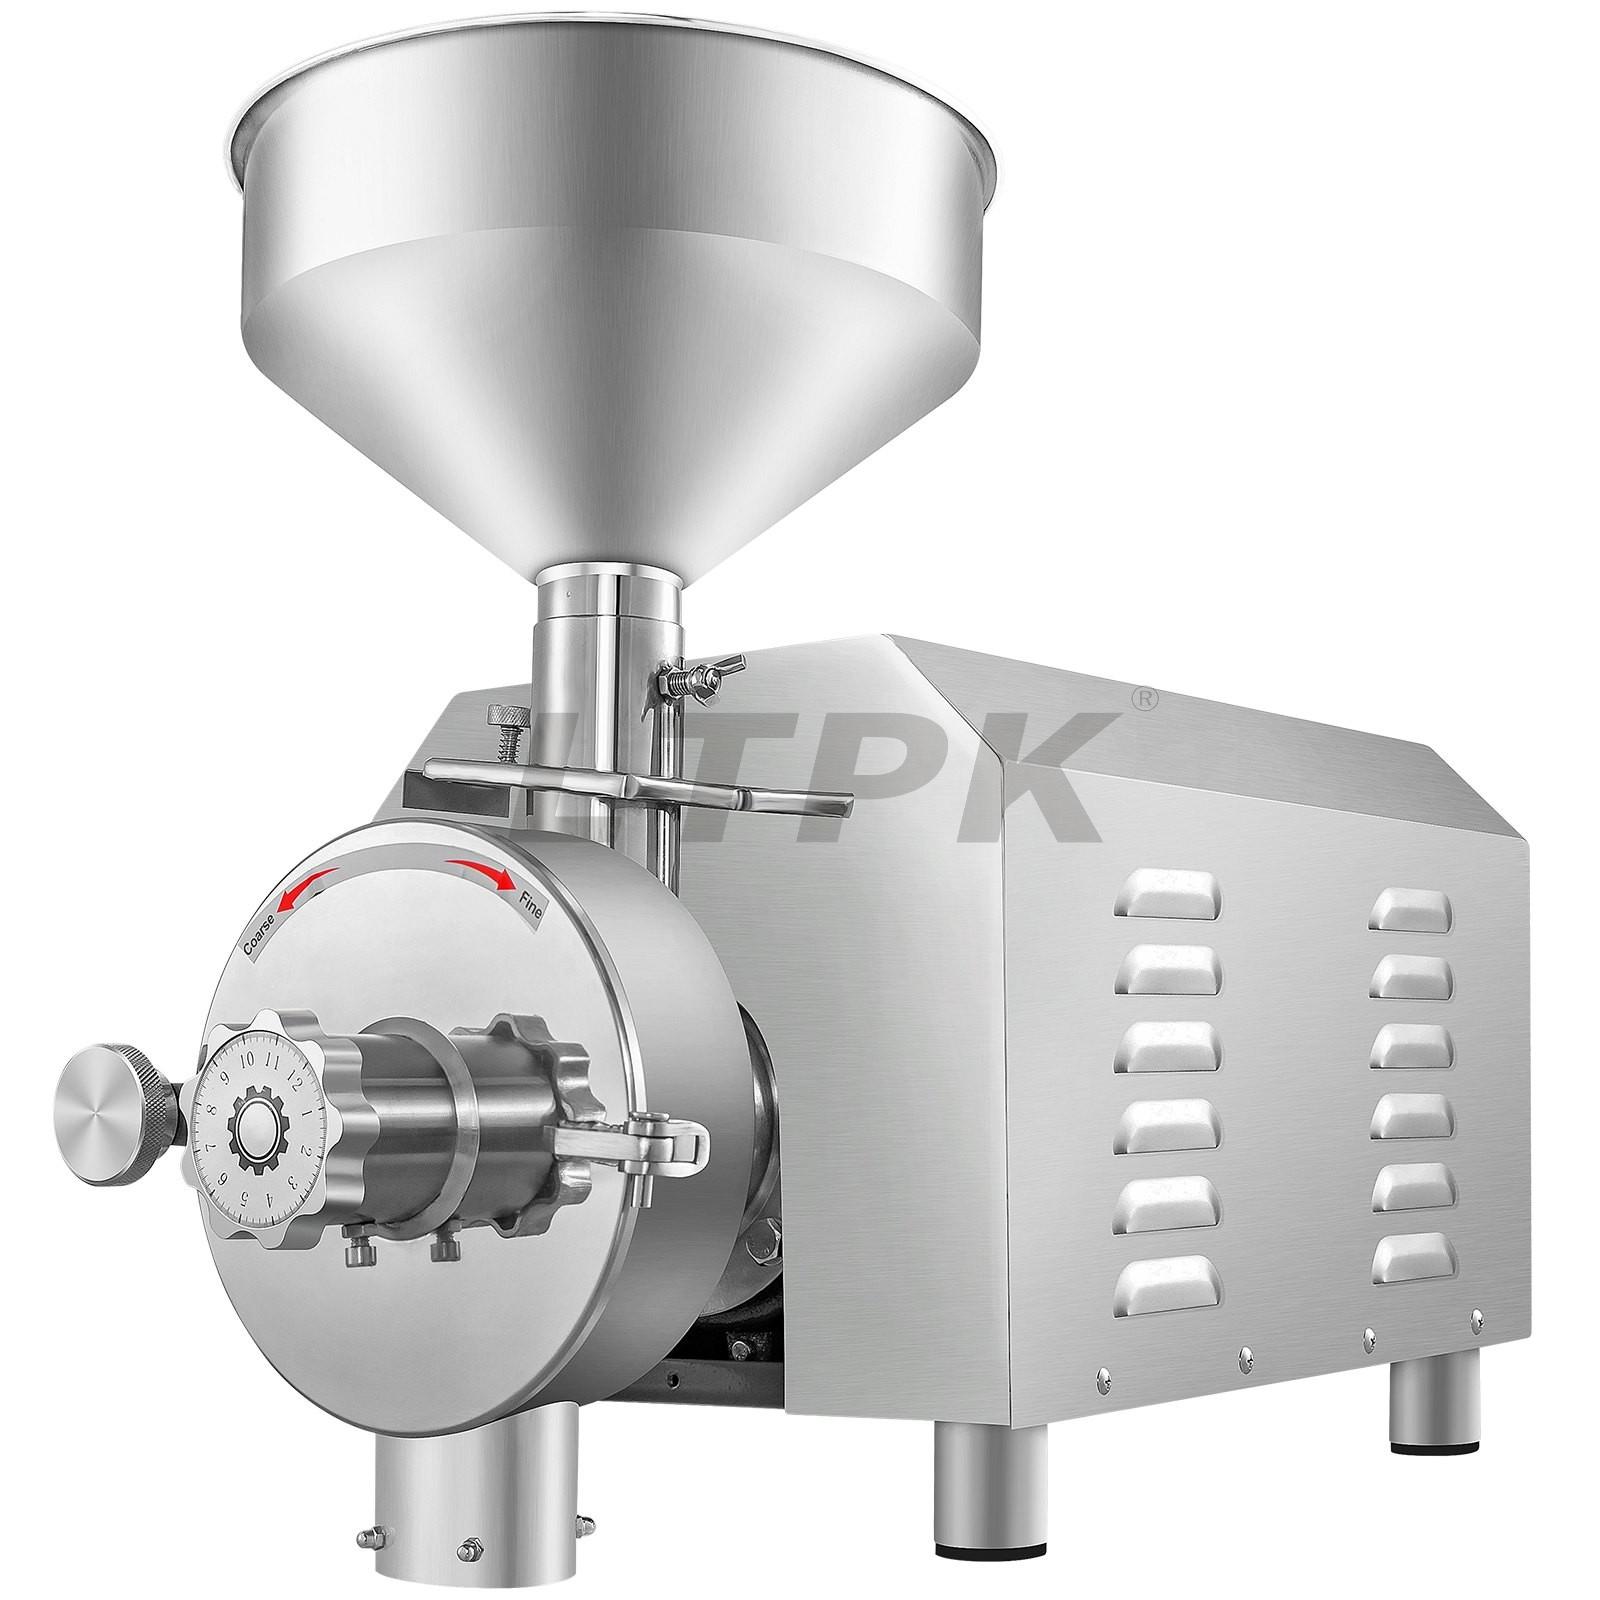 LT-3000 3KW Soybean Grinder Commercial Grinding Machine for Spices 